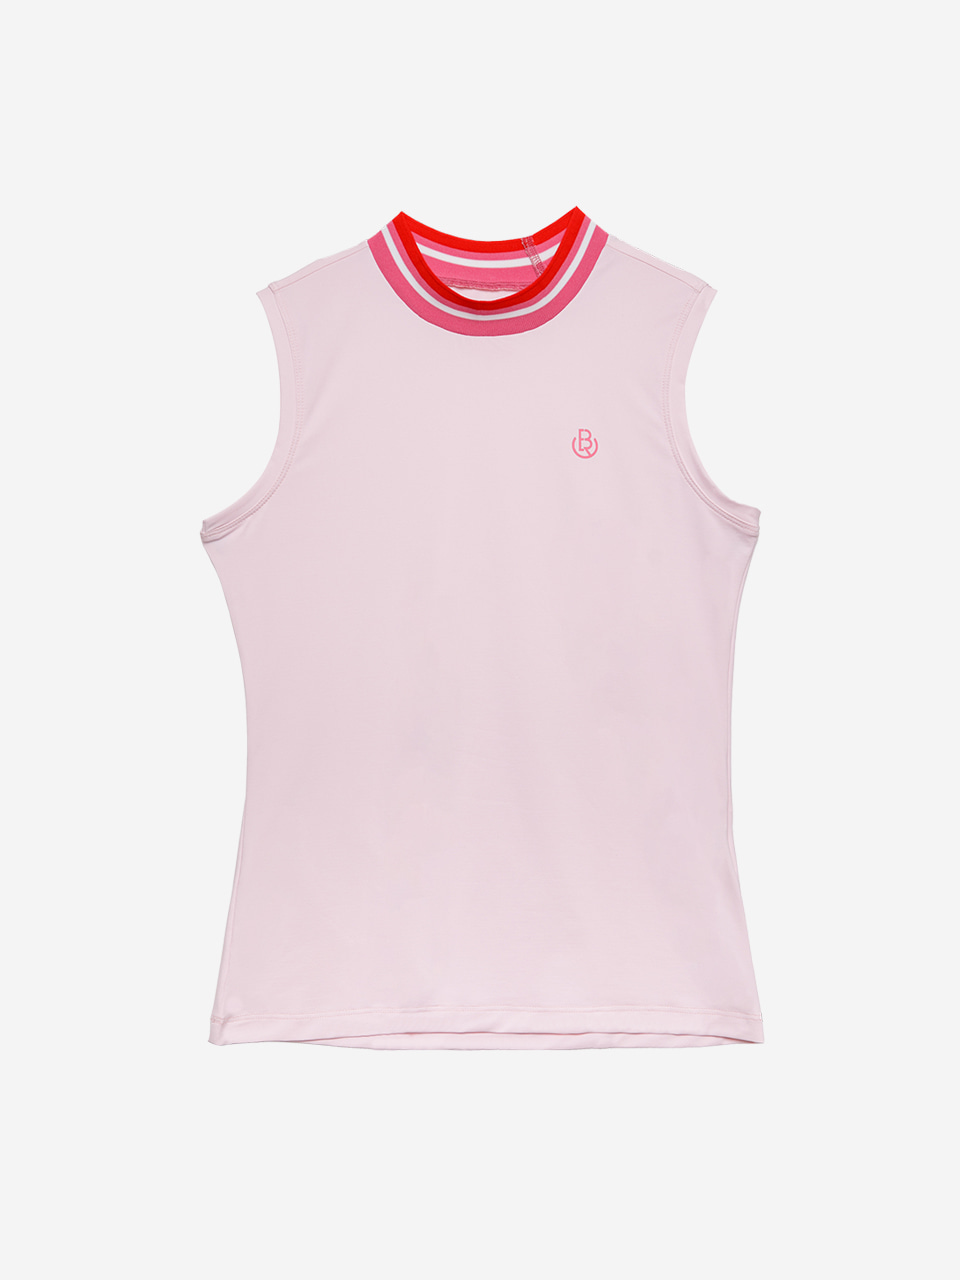 Multi Color Cooling Sleeveless (pink)